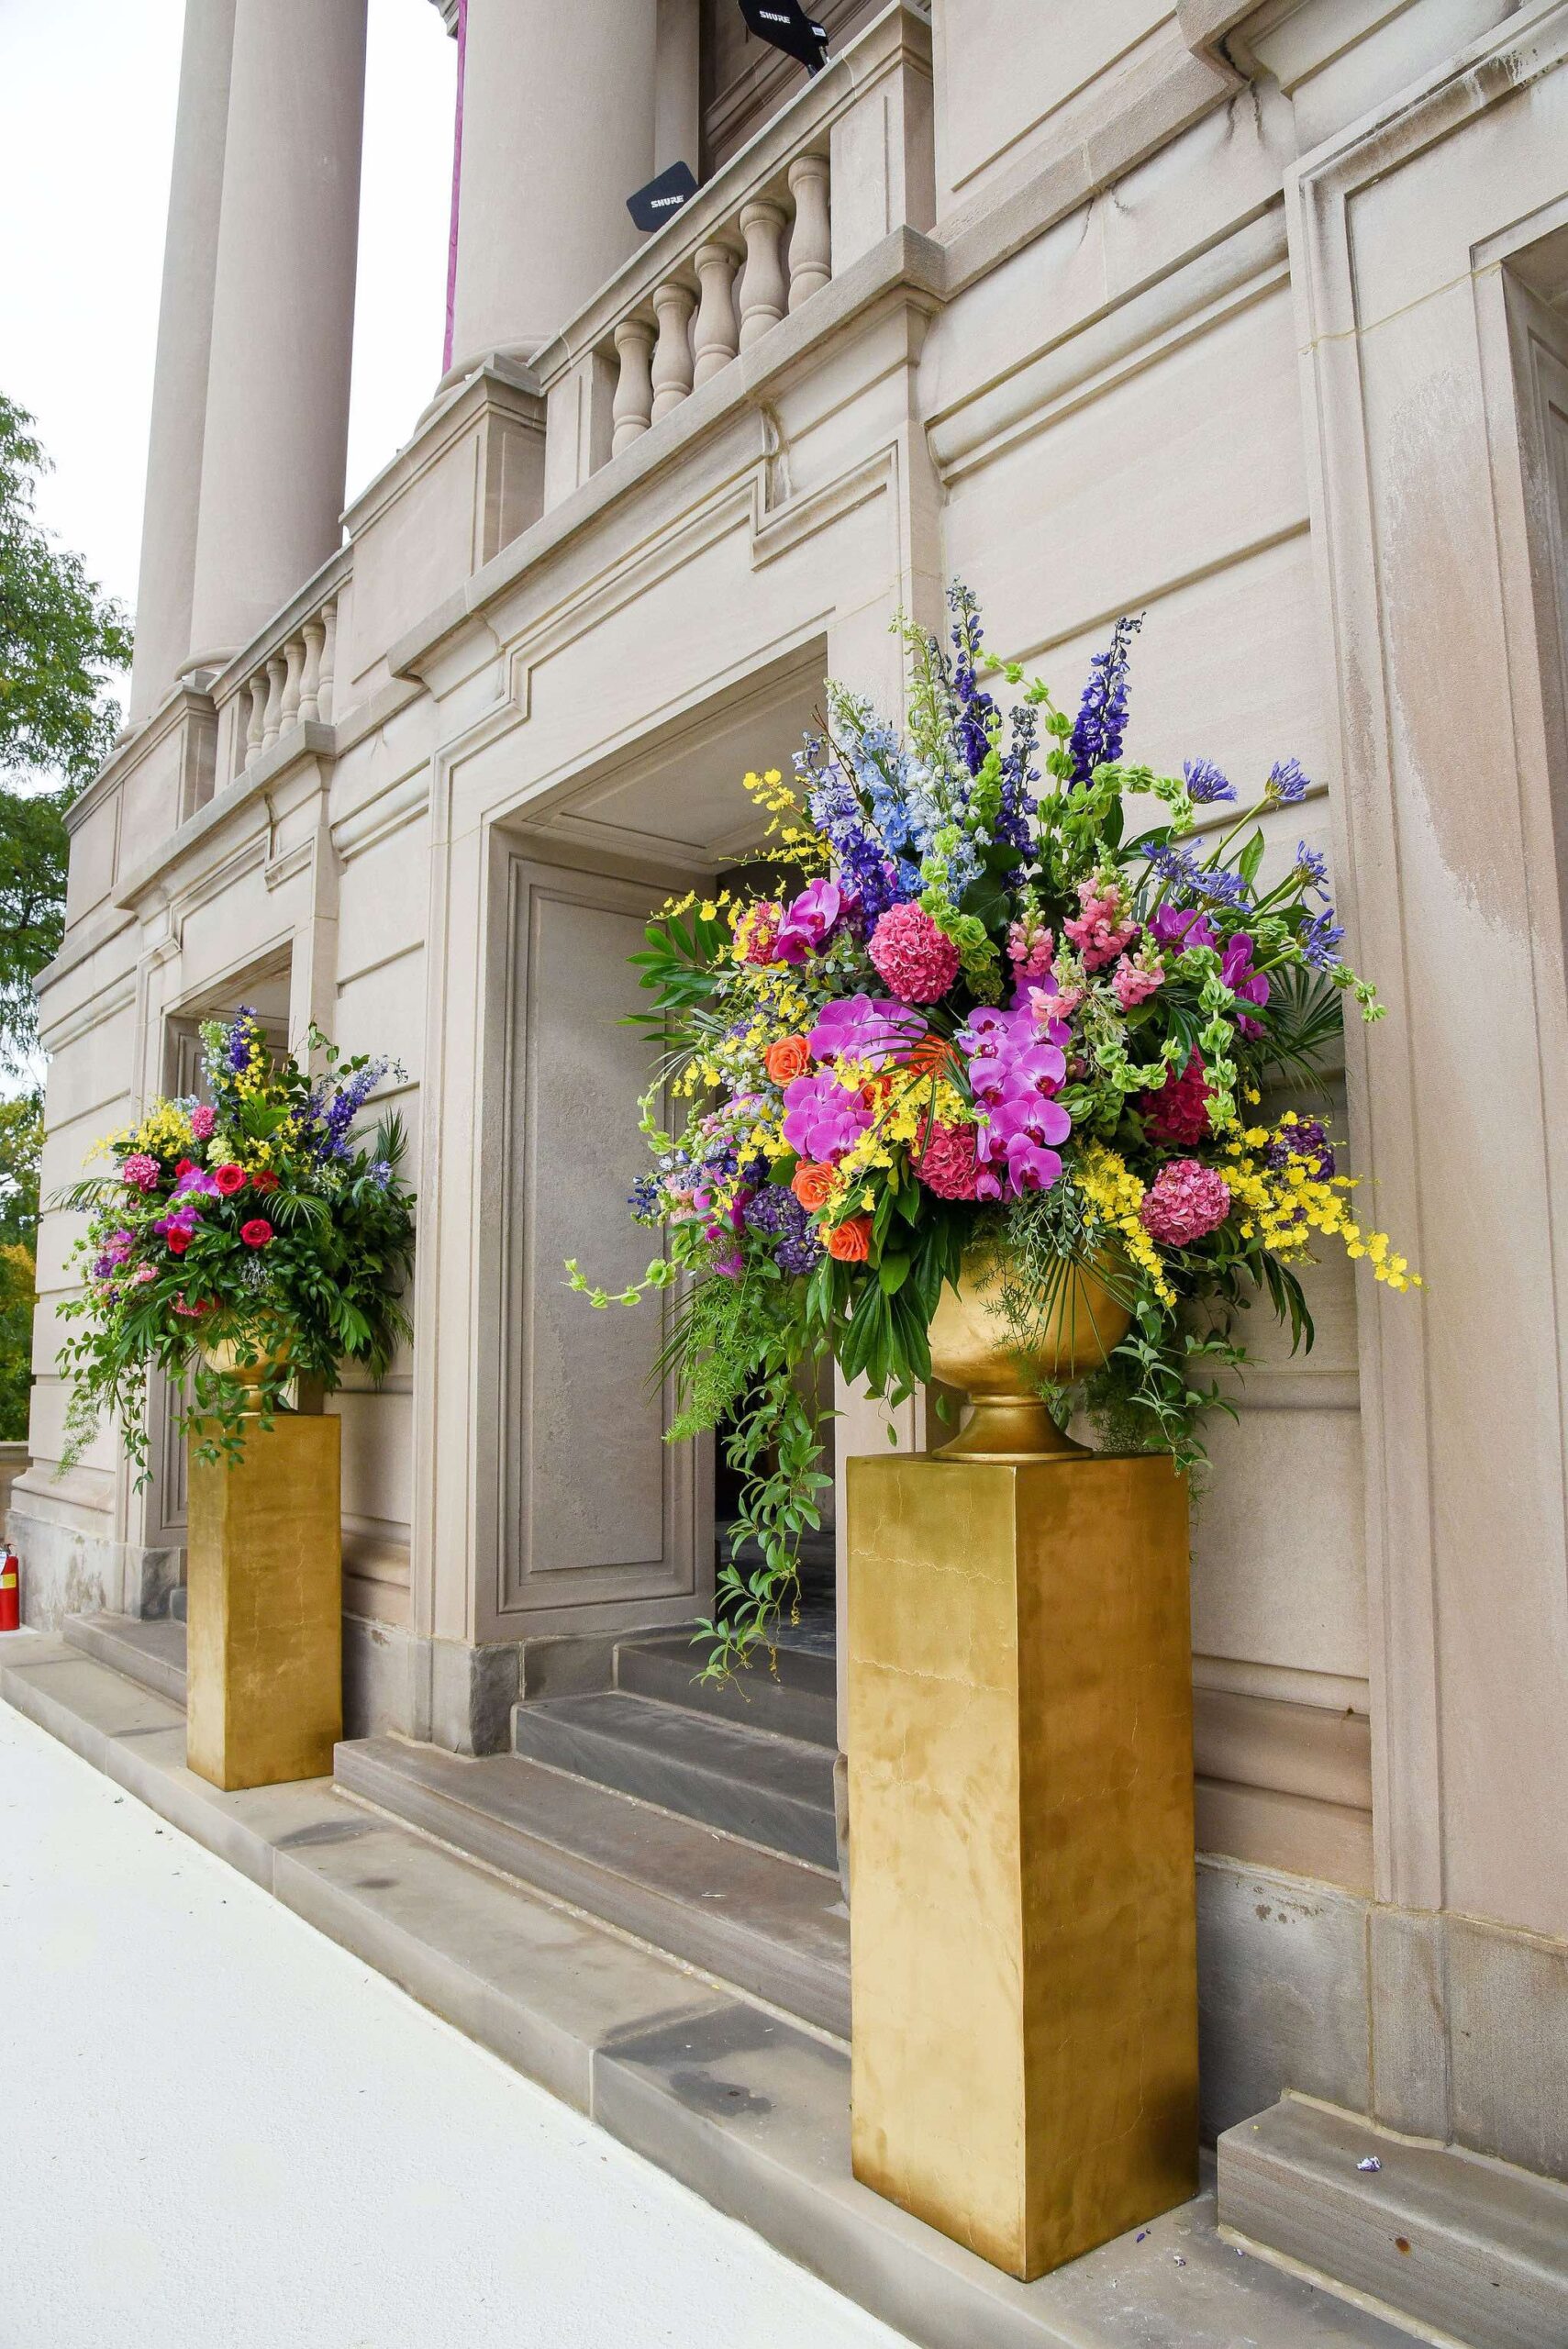 The Severance Hall Grand Entrance ready to await guests at the 2022 Cleveland Orchestra Gala. Flowers by HeatherLily